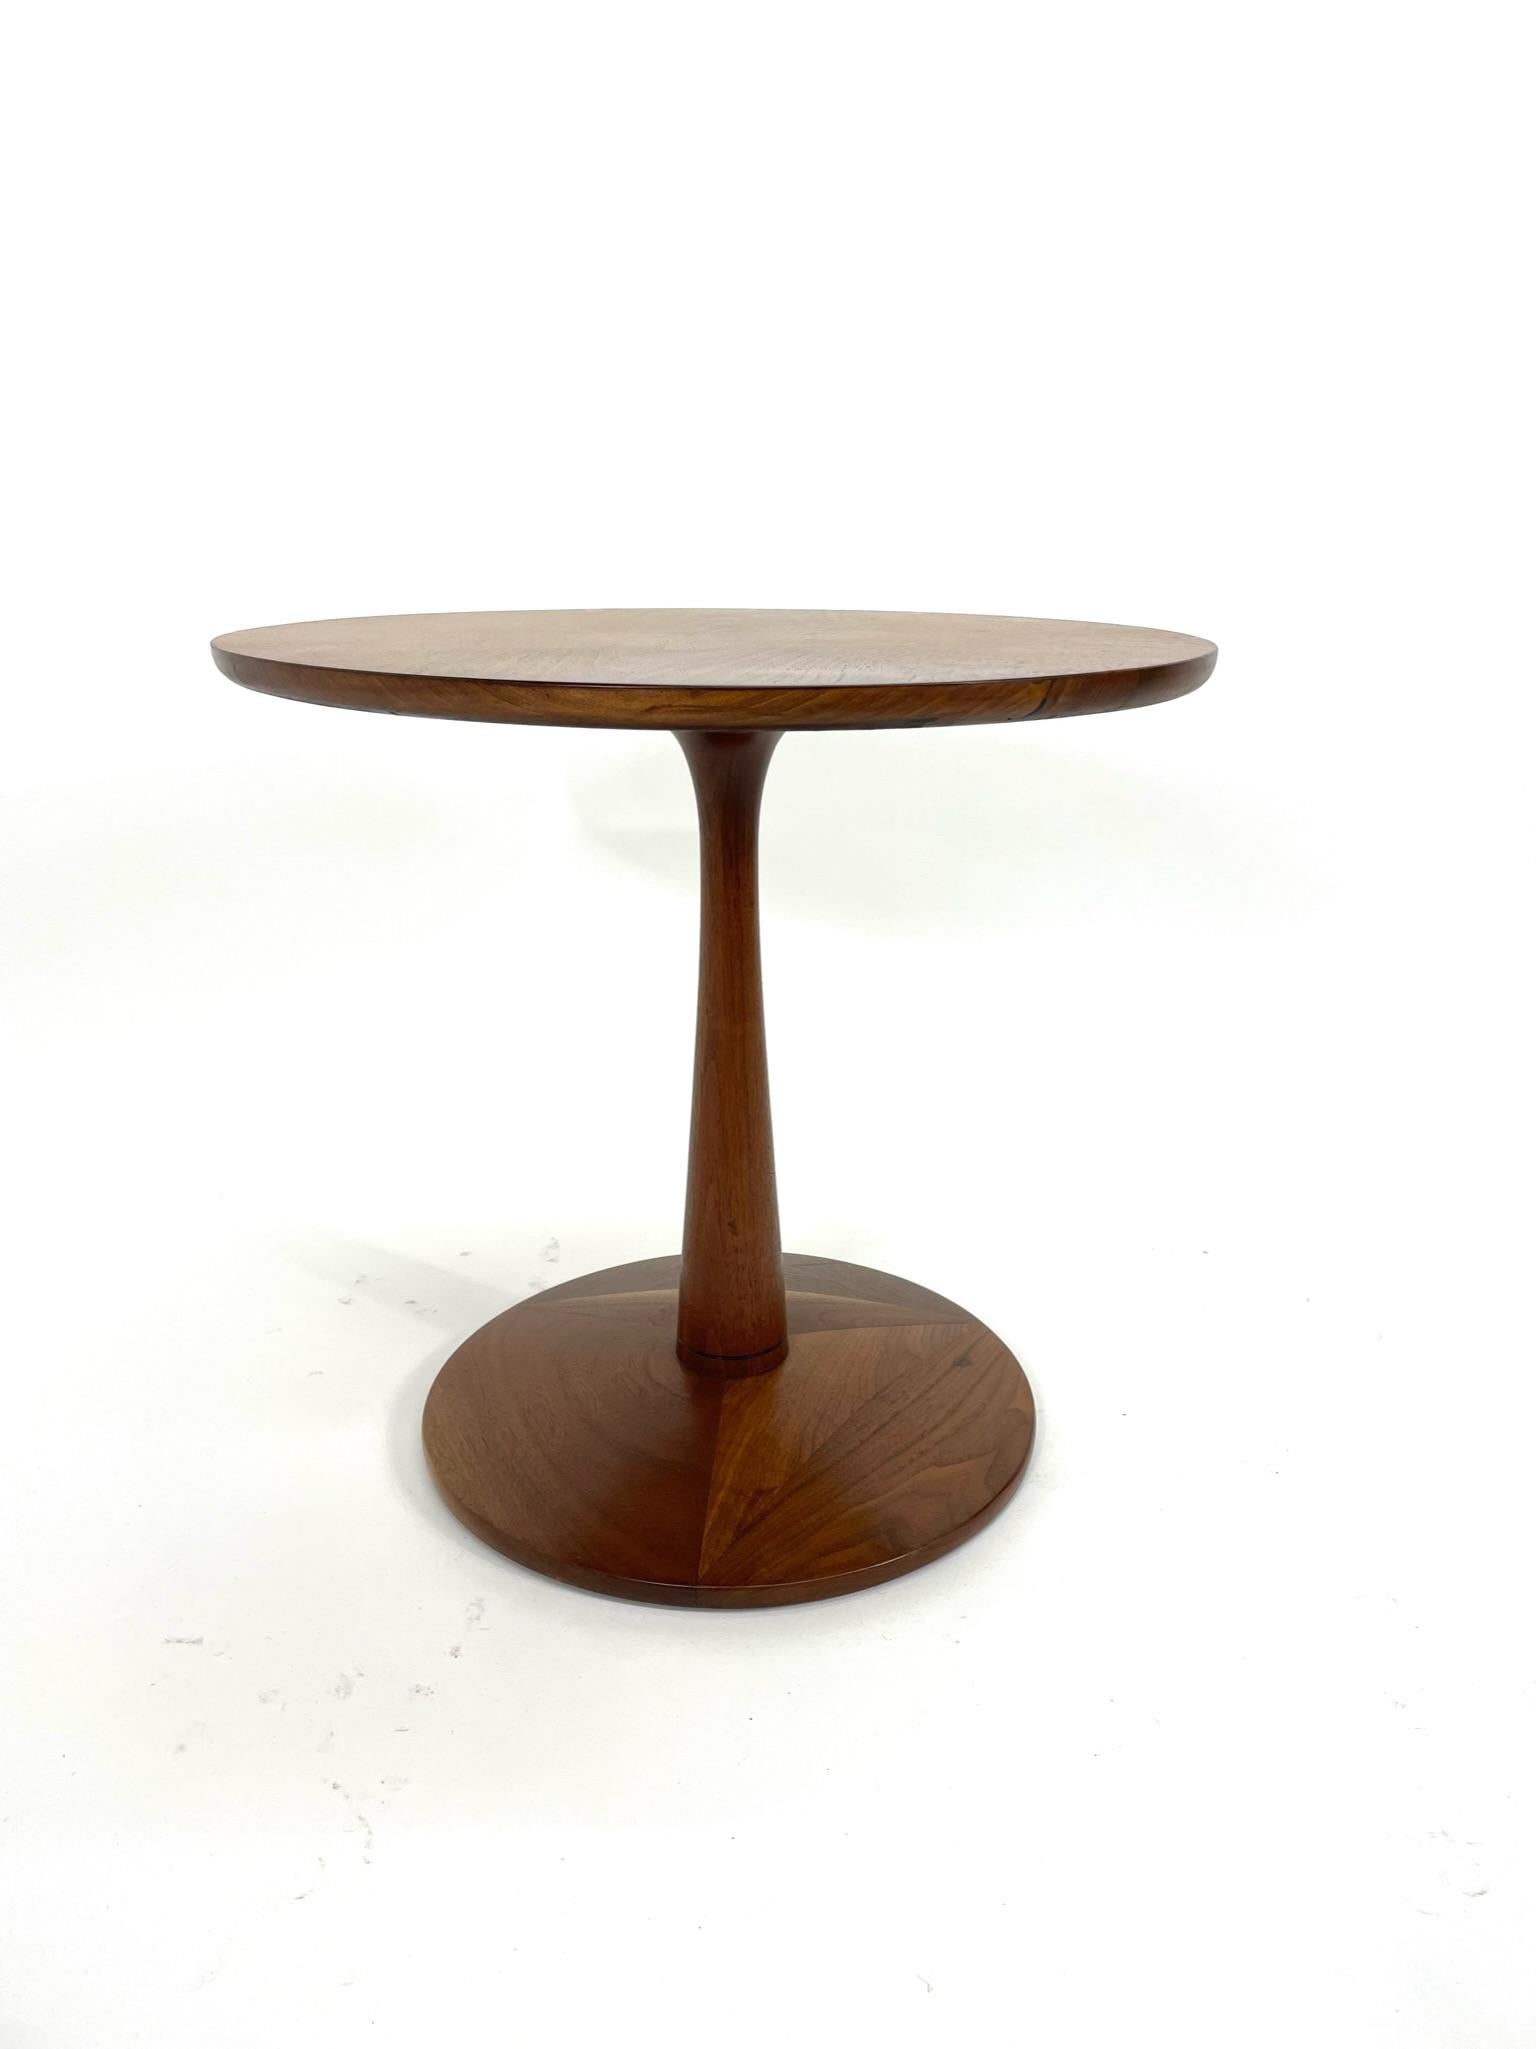 Kipp Stewart for Drexel side table from the Declaration line features book-matched walnut veneer on the top and a pedestal base. It has been restored to excellent condition to show off the beautiful grain on both the top and base. It's clean lines